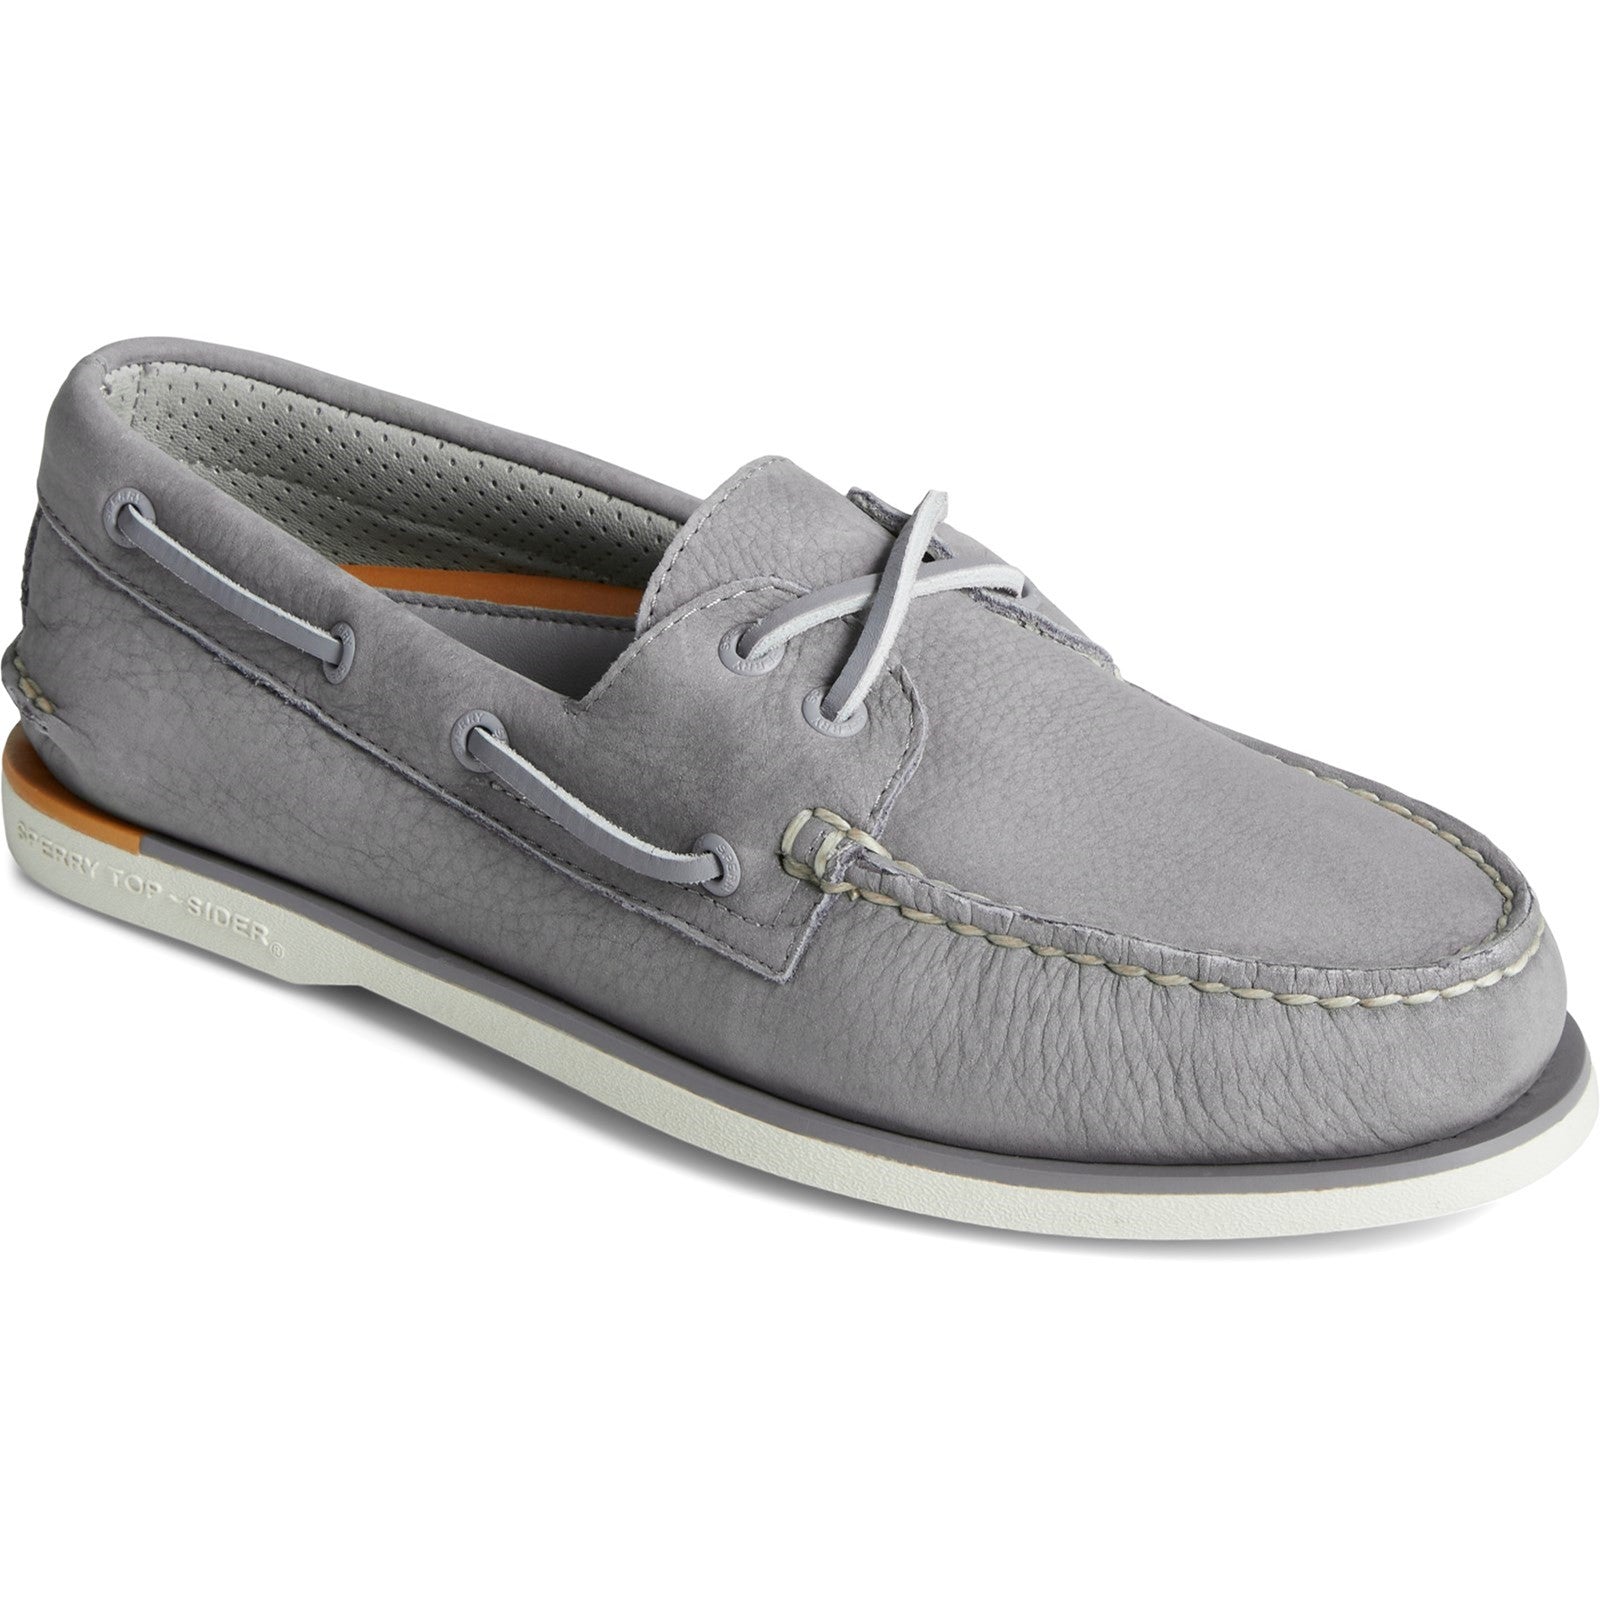 Sperry Mens Gold Authentic Original 2-Eye Nubuck Boat Shoes - Grey